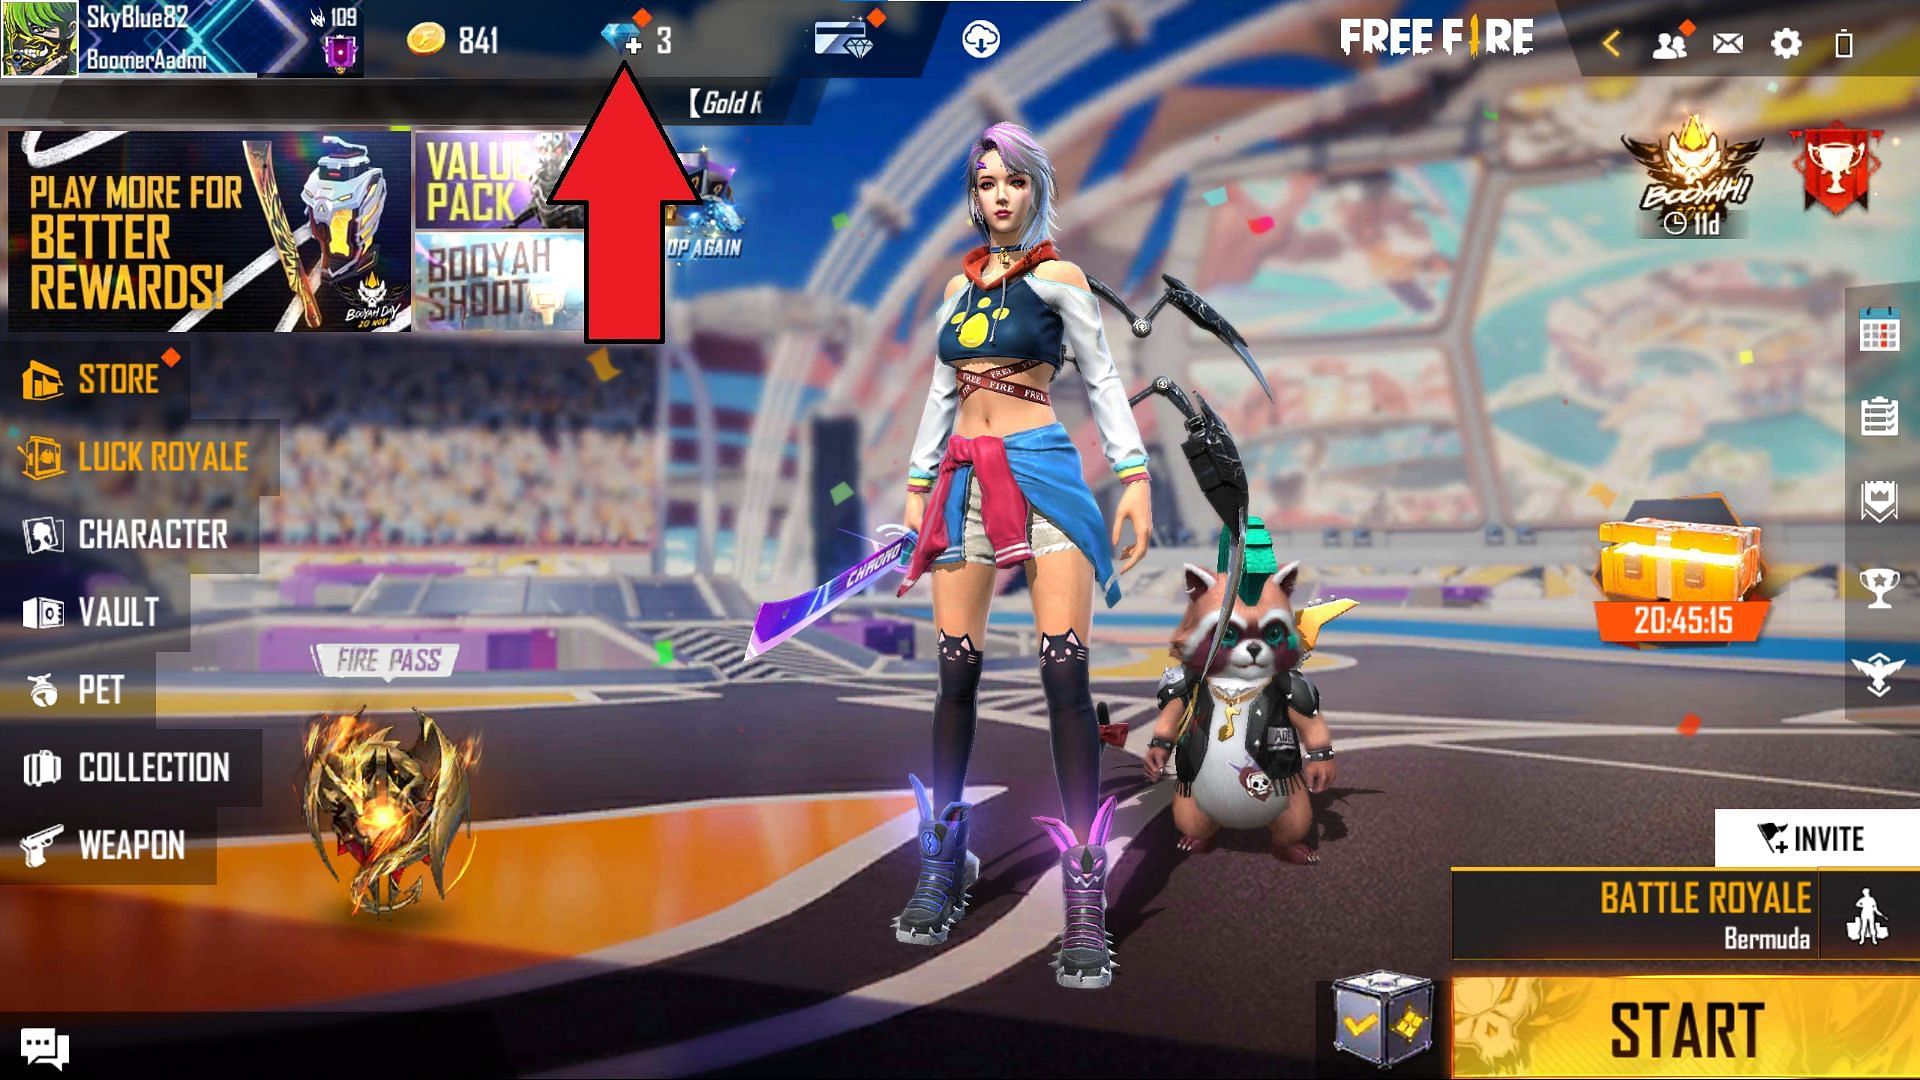 How to top up Free Fire diamonds to get free legendary skins this week